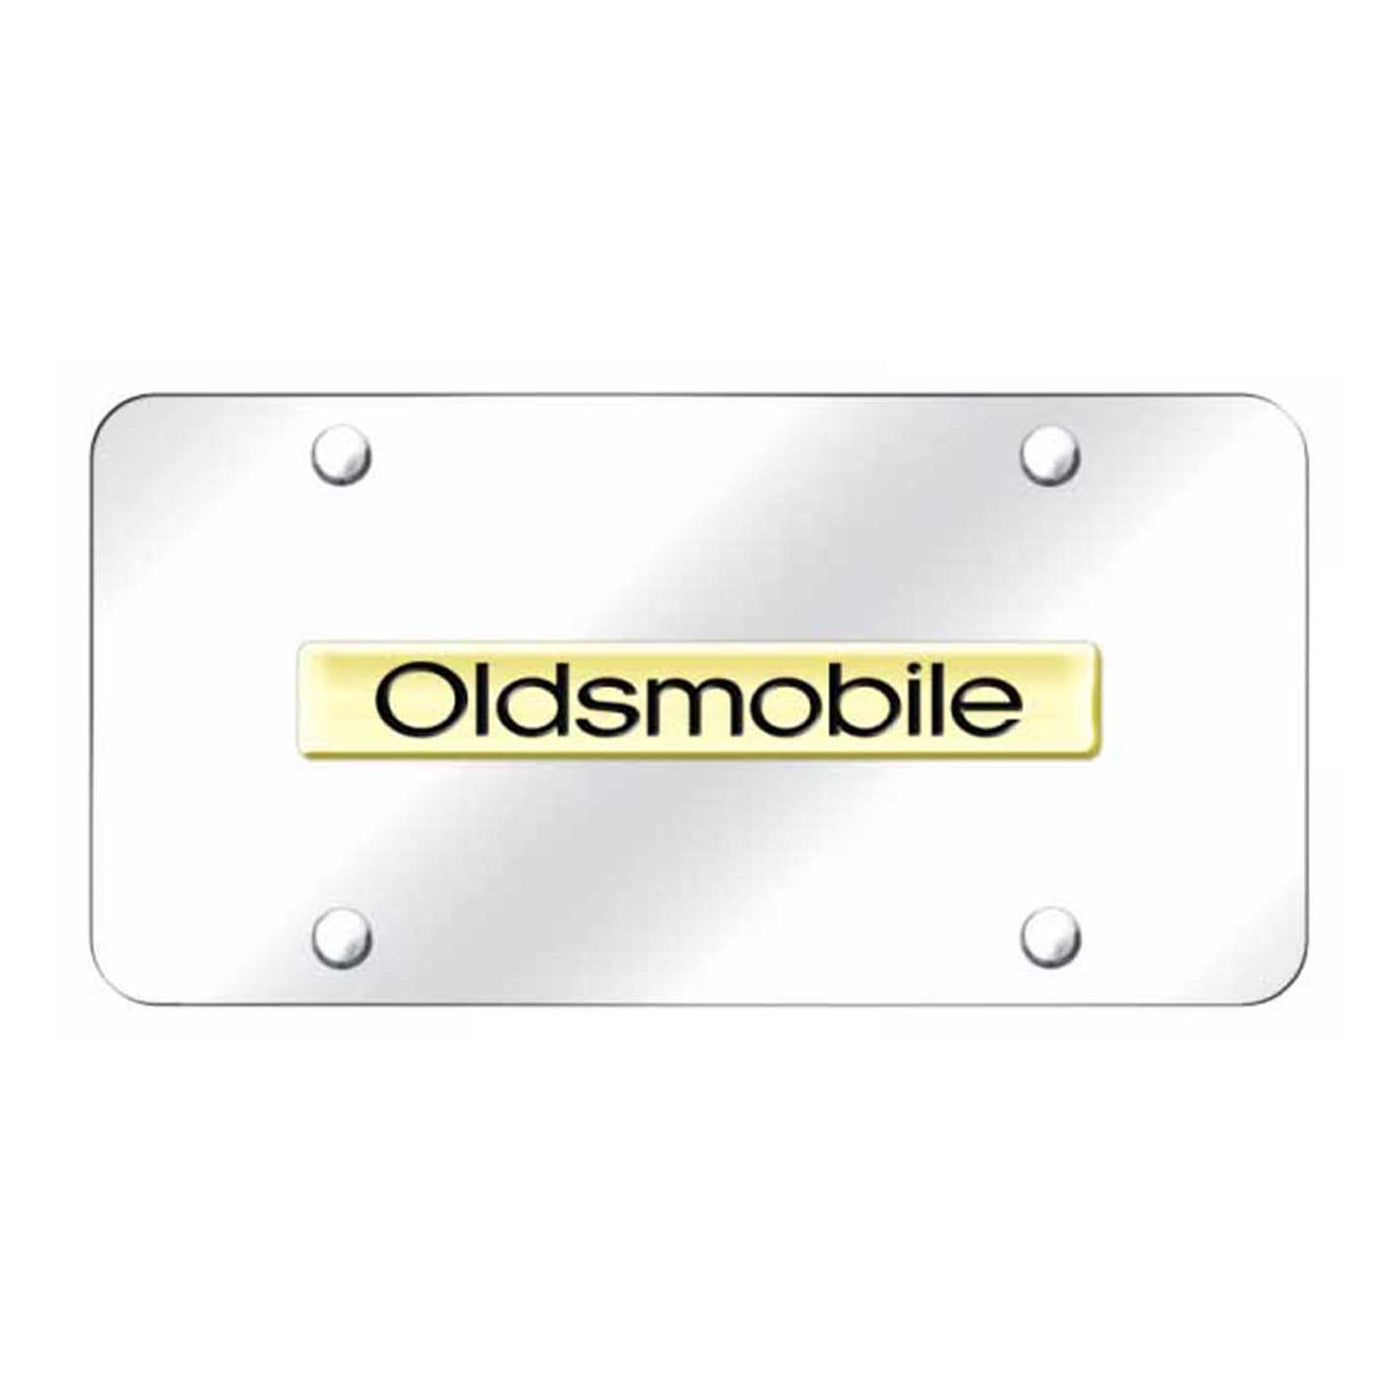 Oldsmobile Name License Plate - Gold on Mirrored